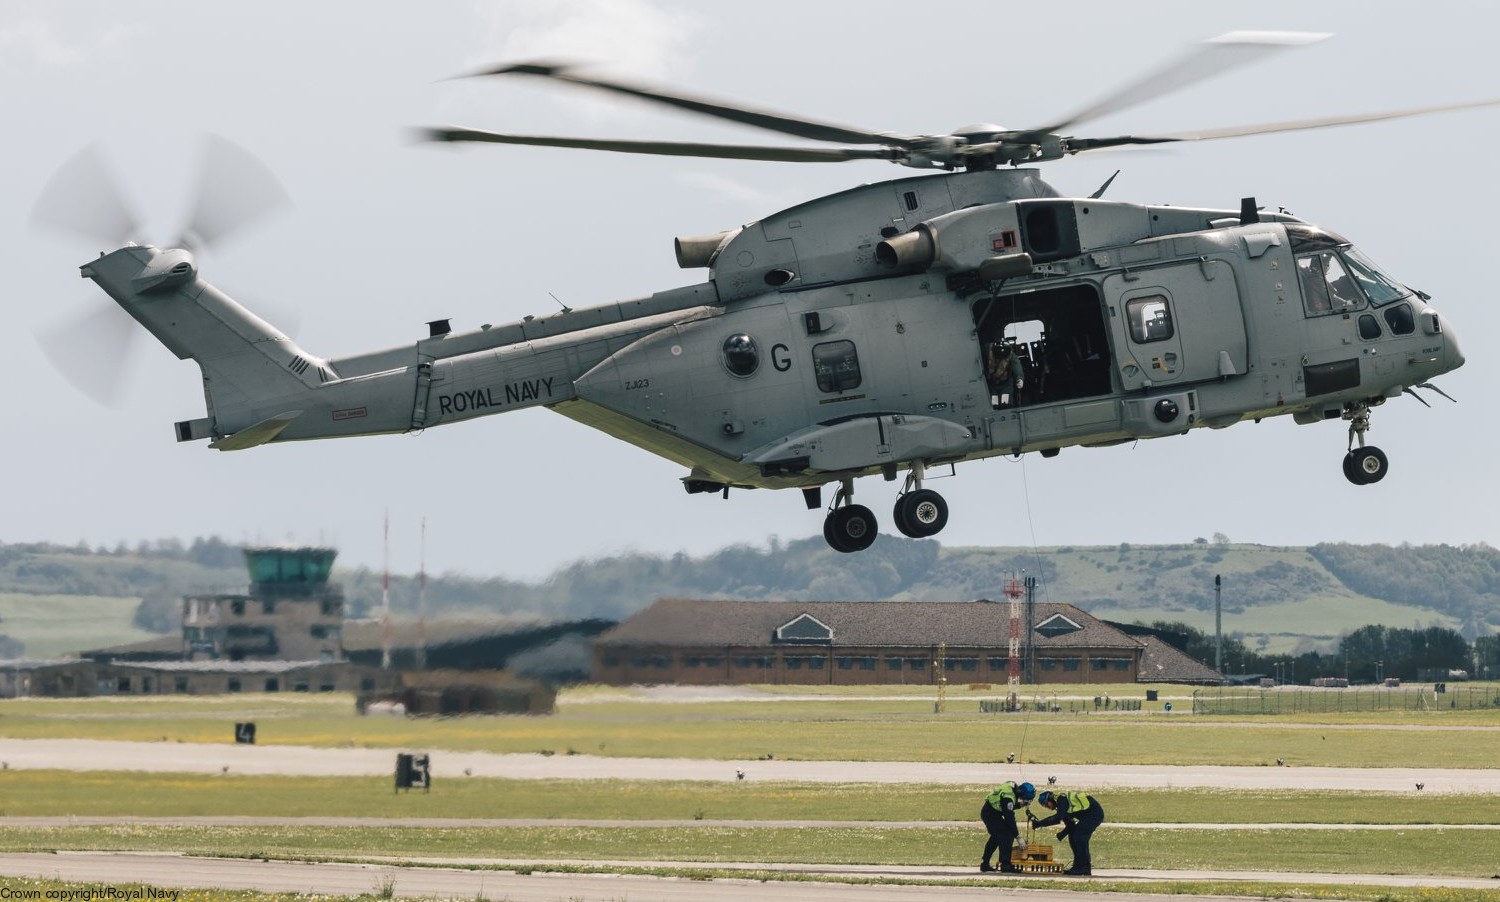 merlin hc4 mk.4 commando helicopter force chf royal navy 845 846 naval air squadron rnas yeovilton aw101 33